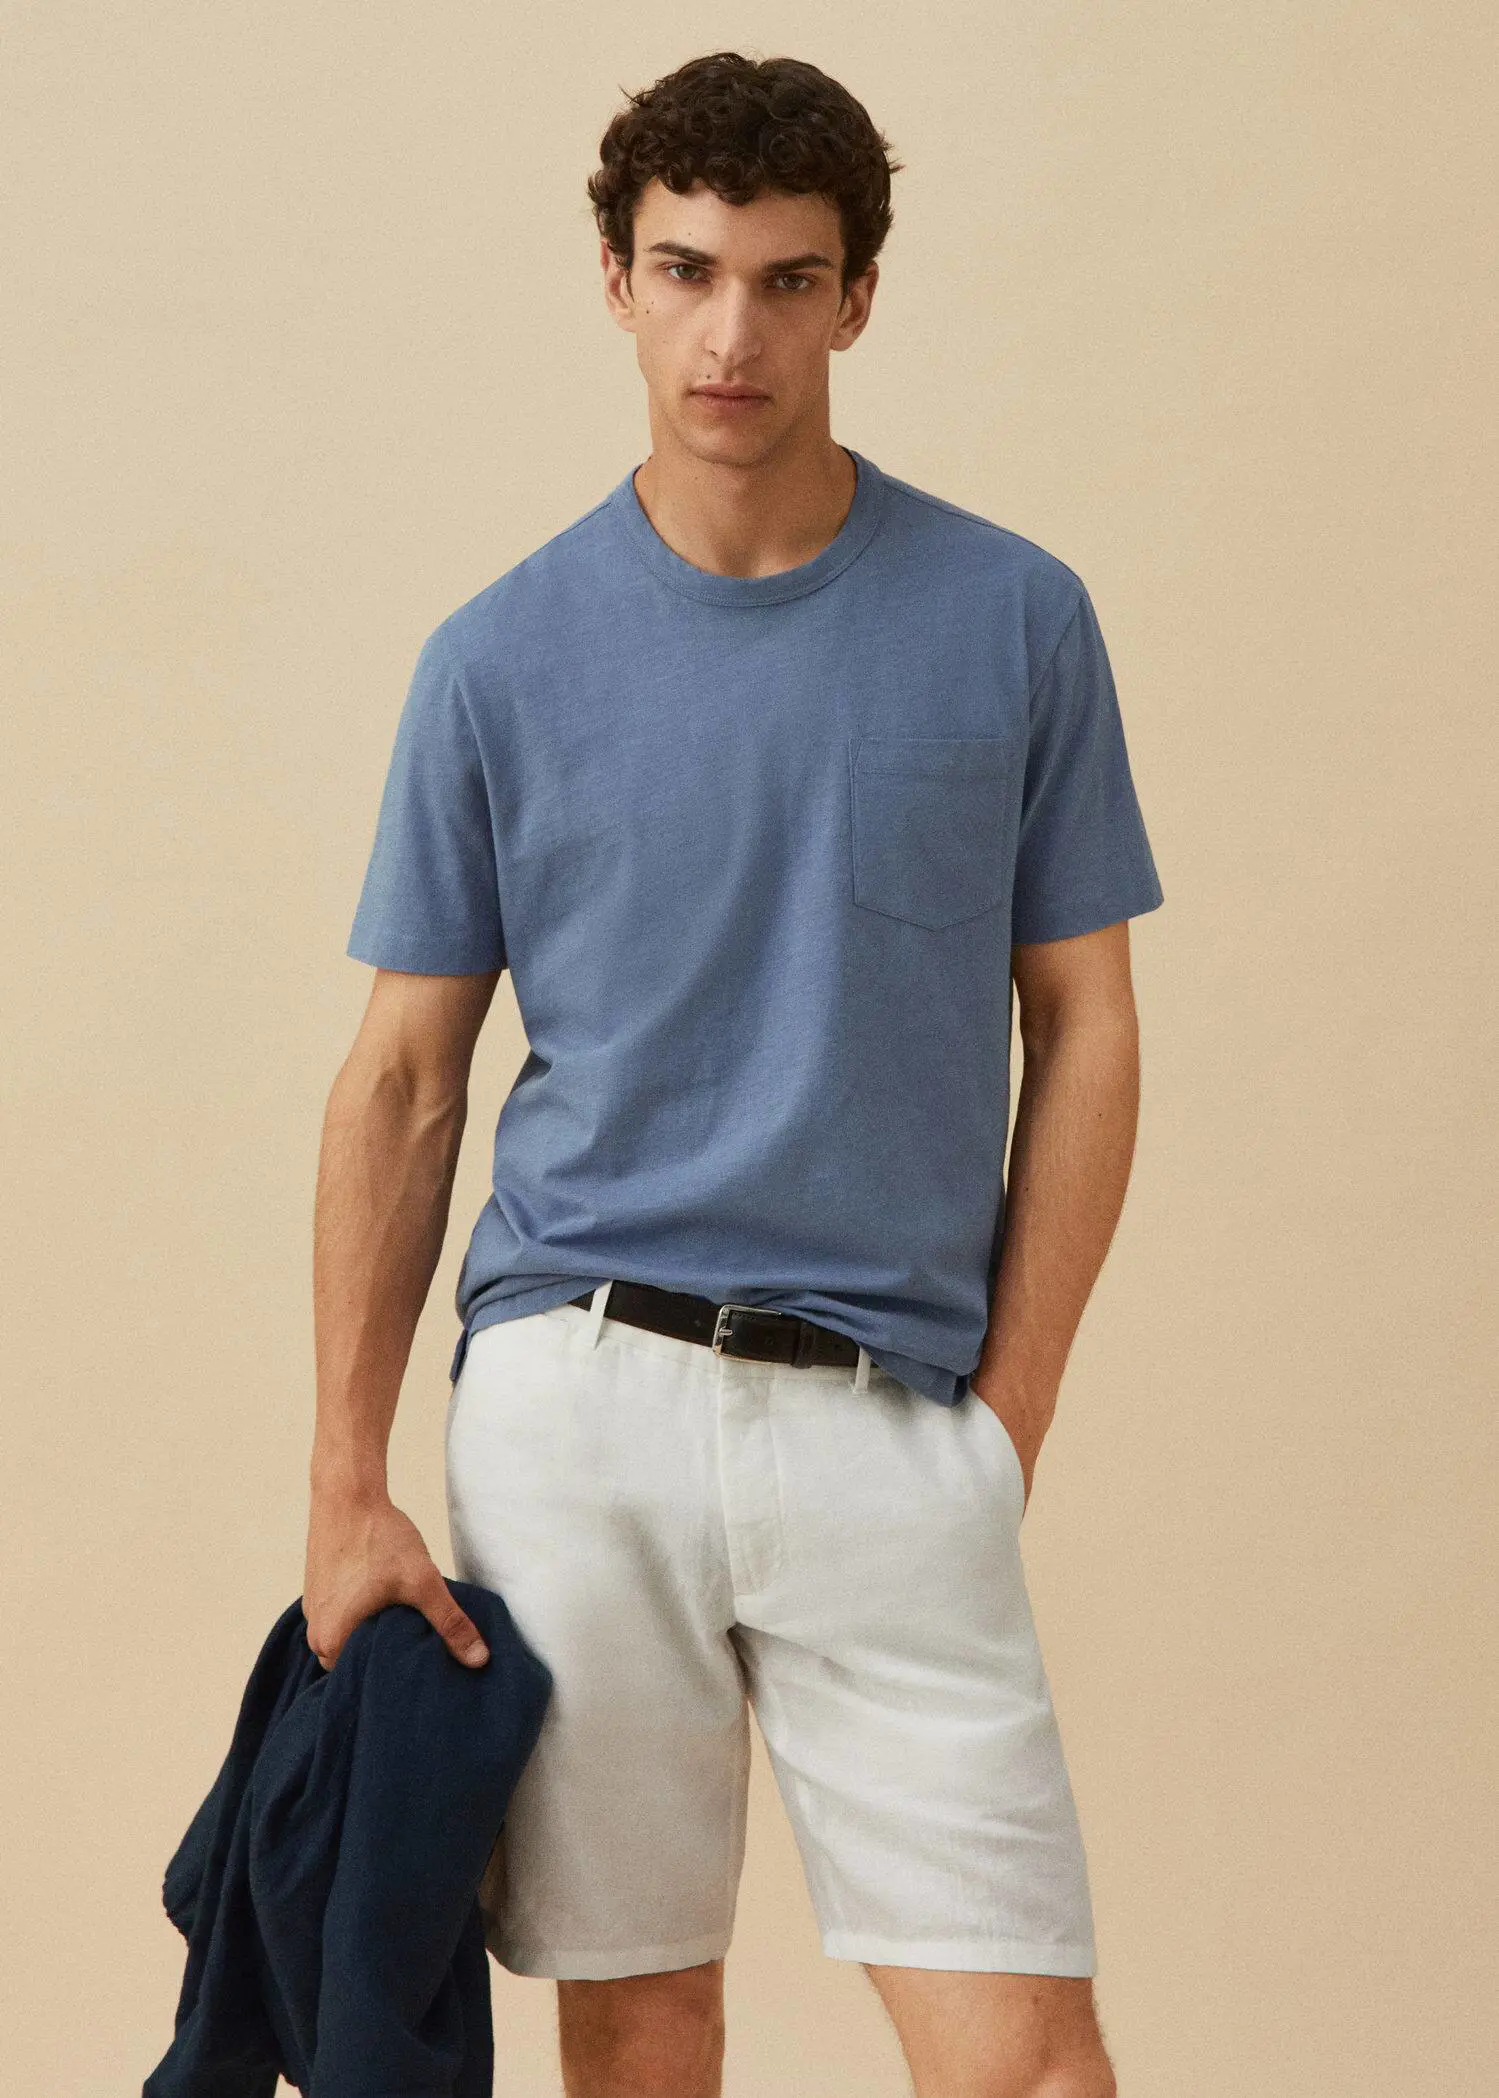 Mango 100% cotton t-shirt with pocket. a man in a blue shirt and white shorts. 